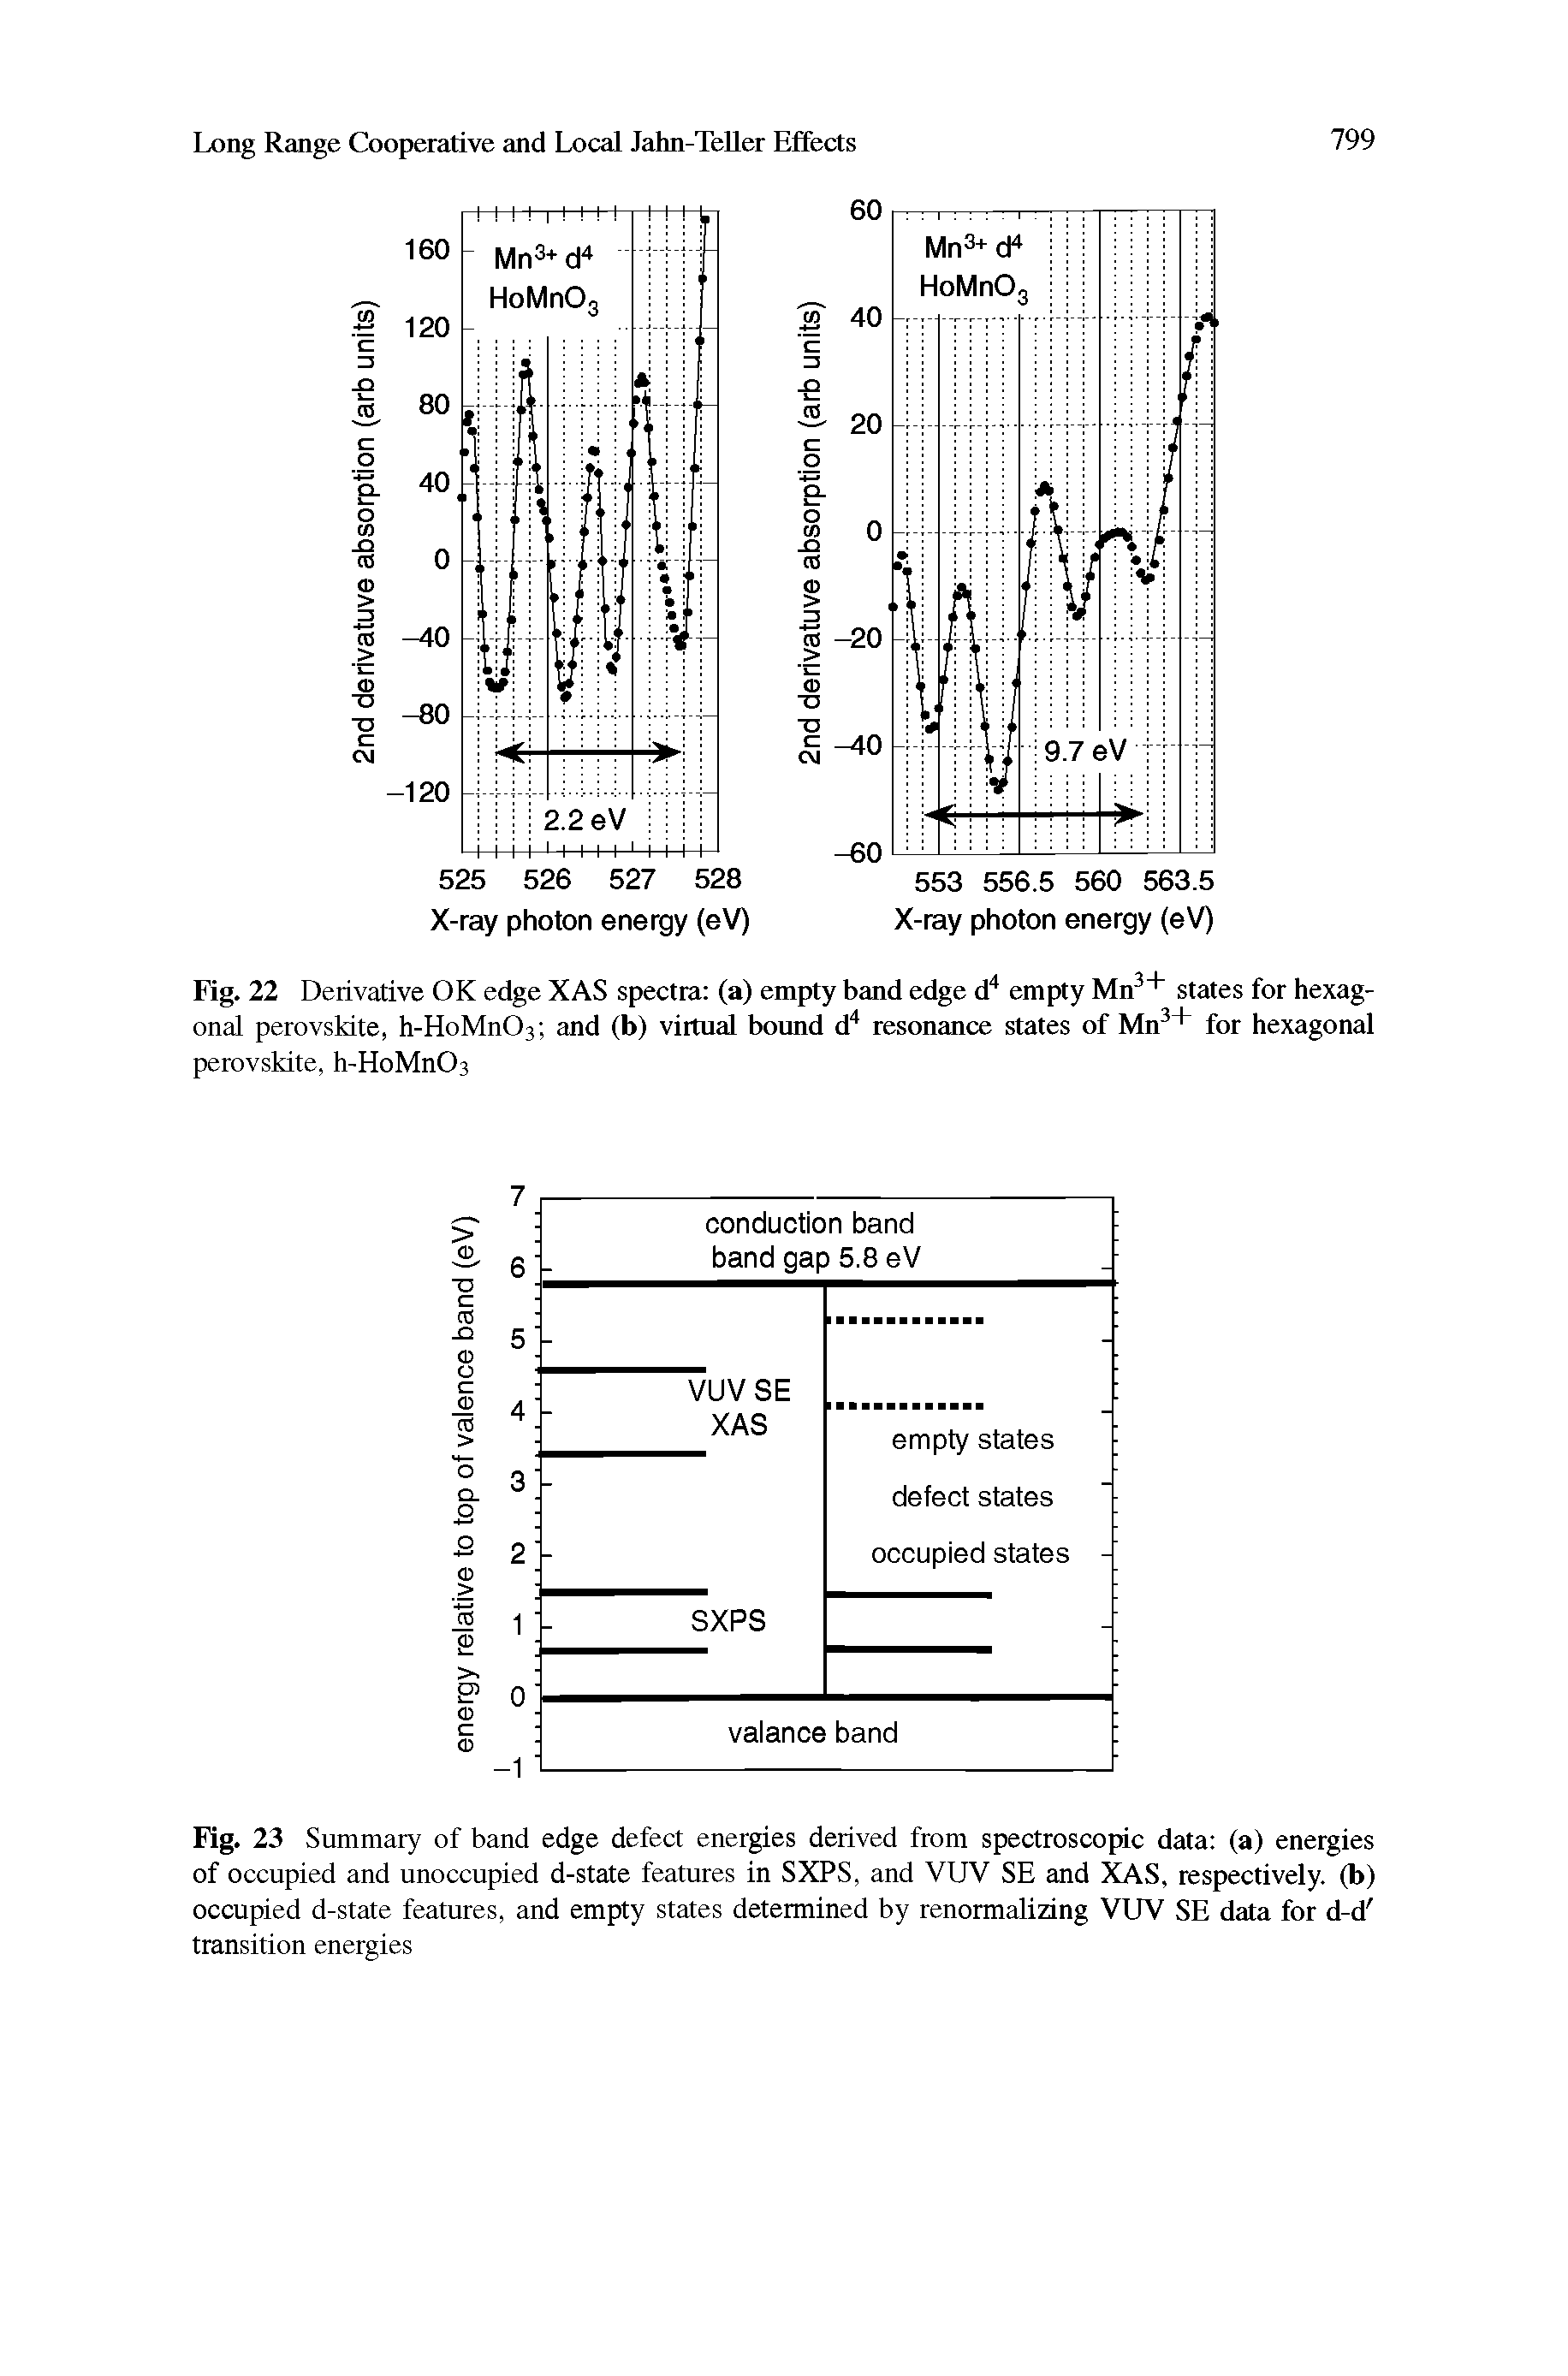 Fig. 23 Summary of band edge defect energies derived from spectroscopic data (a) energies of occupied and unoccupied d-state features in SXPS, and VUV SE and XAS, respectively, (b) occupied d-state features, and empty states determined by renormalizing VUV SE data for d-d transition energies...